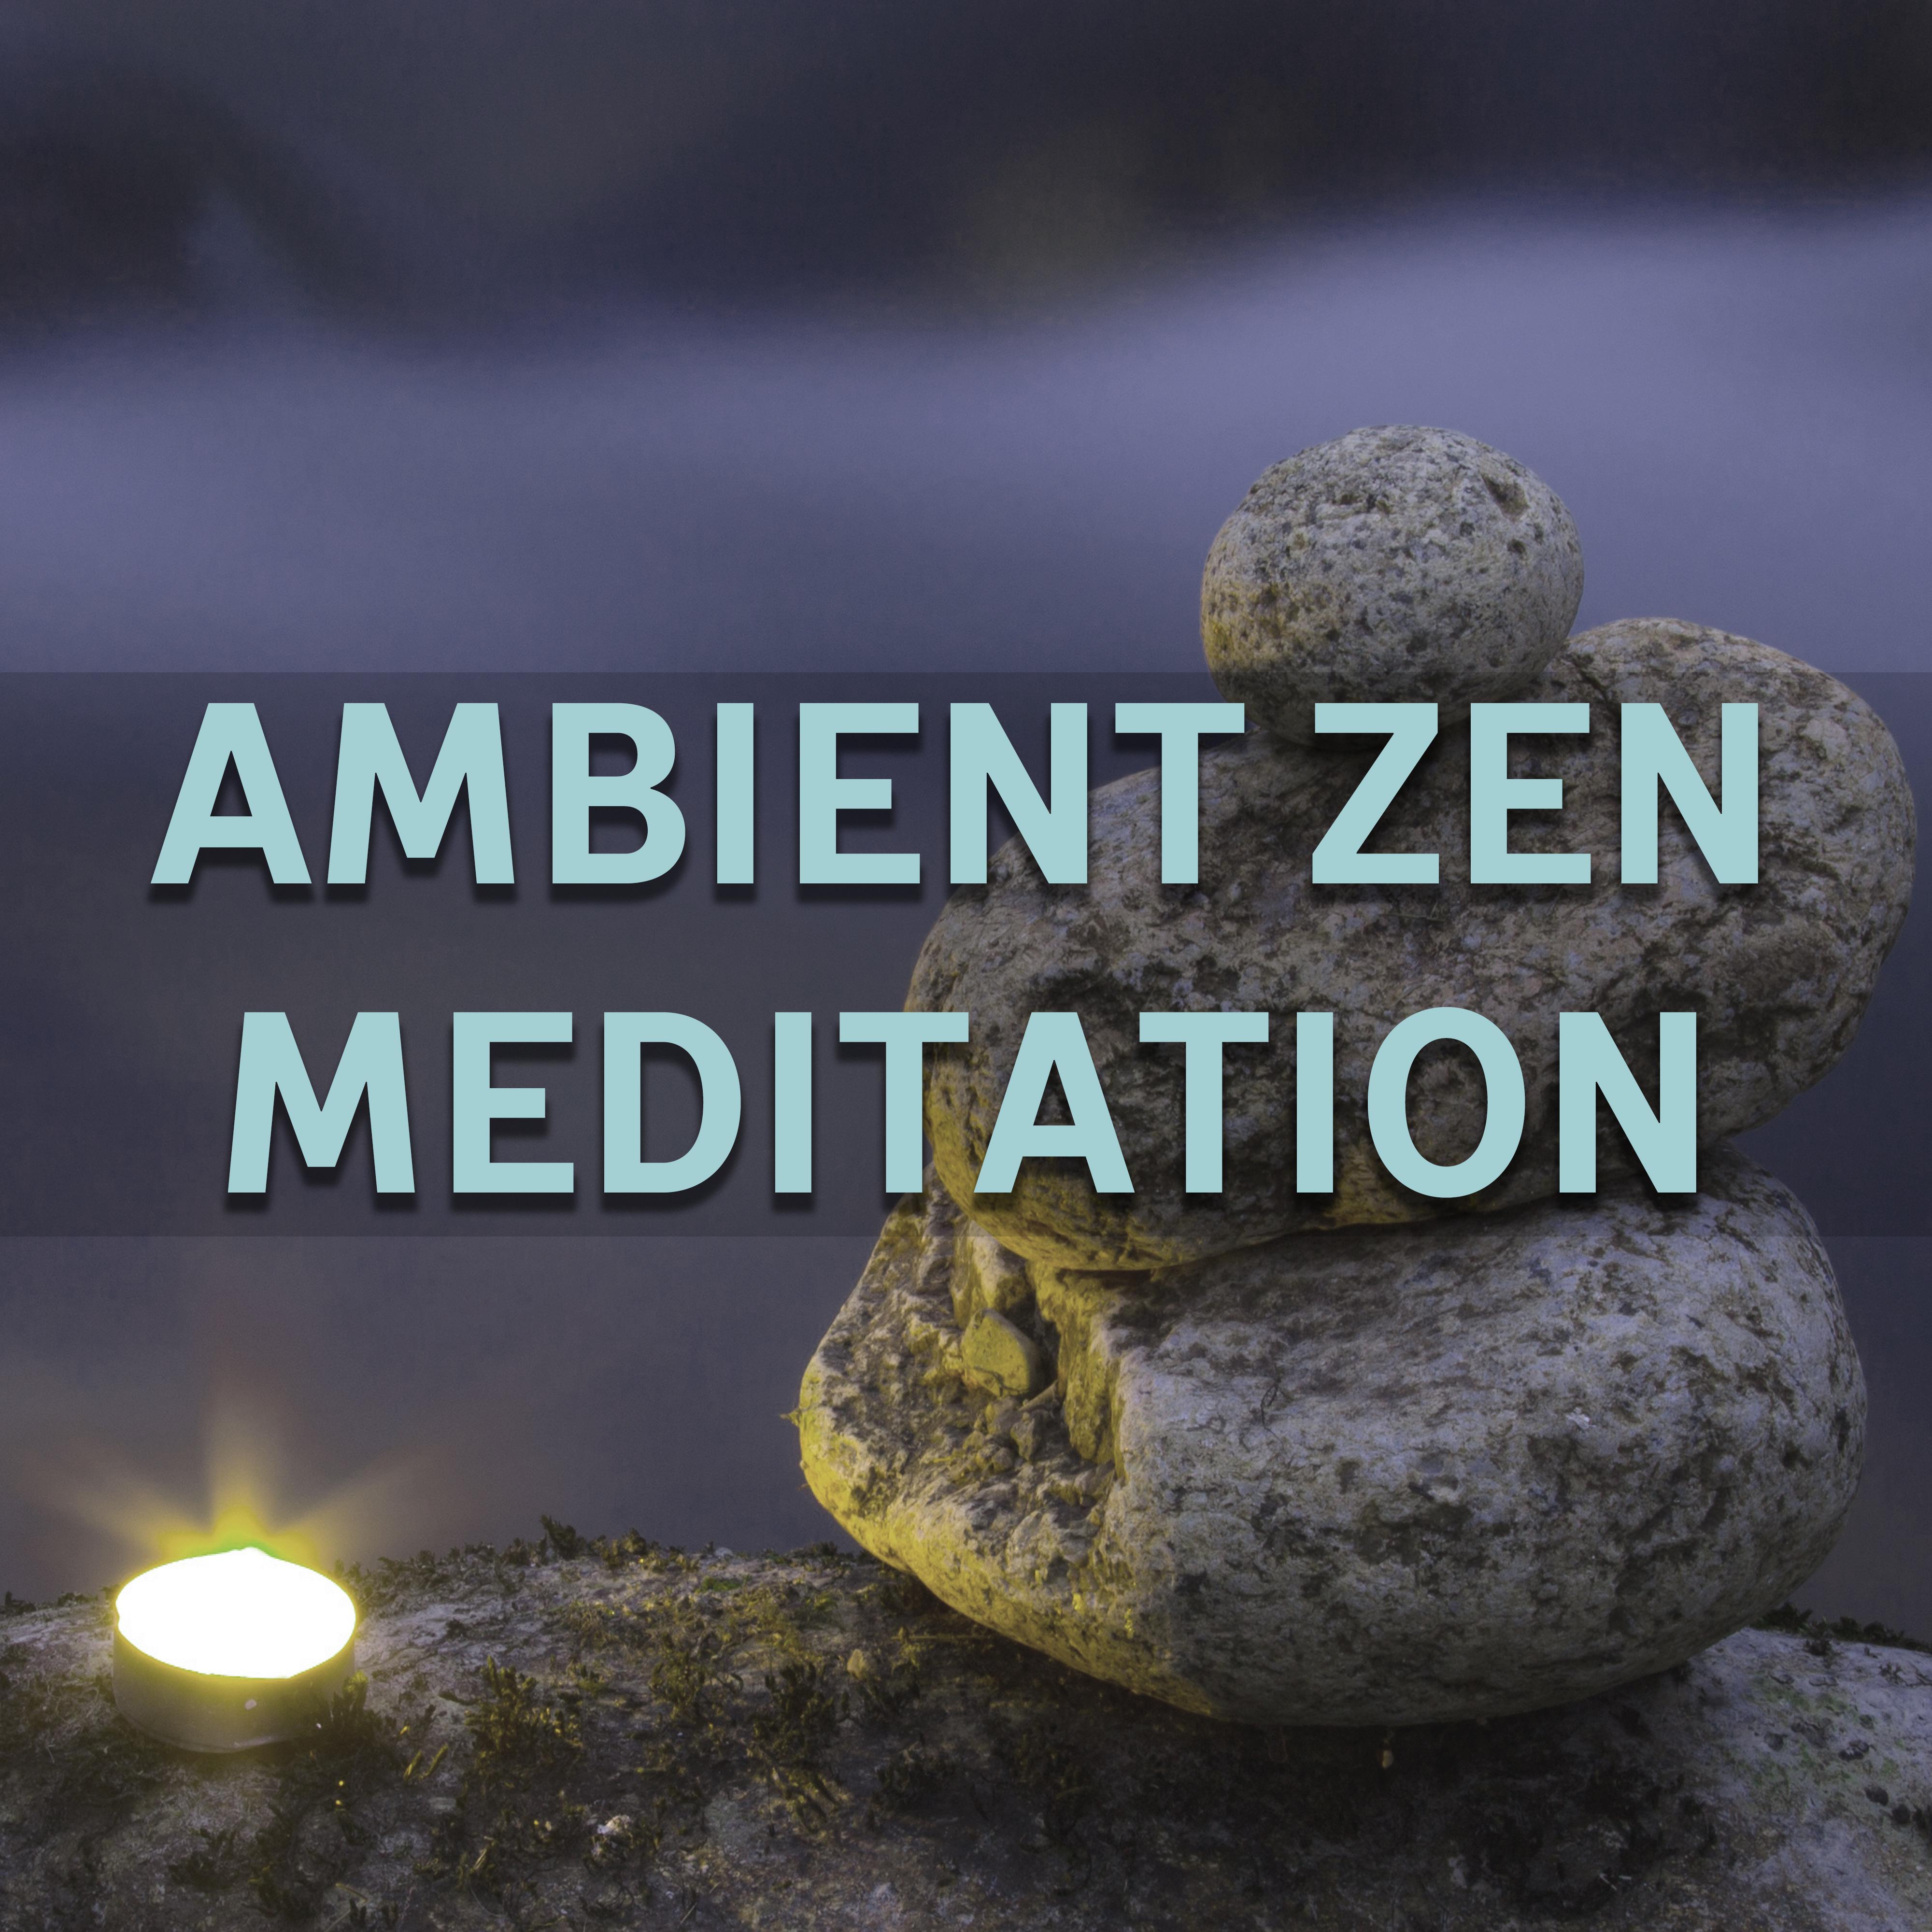 Ambient Zen Meditation – New Age Music, Pure Relaxation, New Age, Relax, Rest After Work, Meditation, Yoga at Home